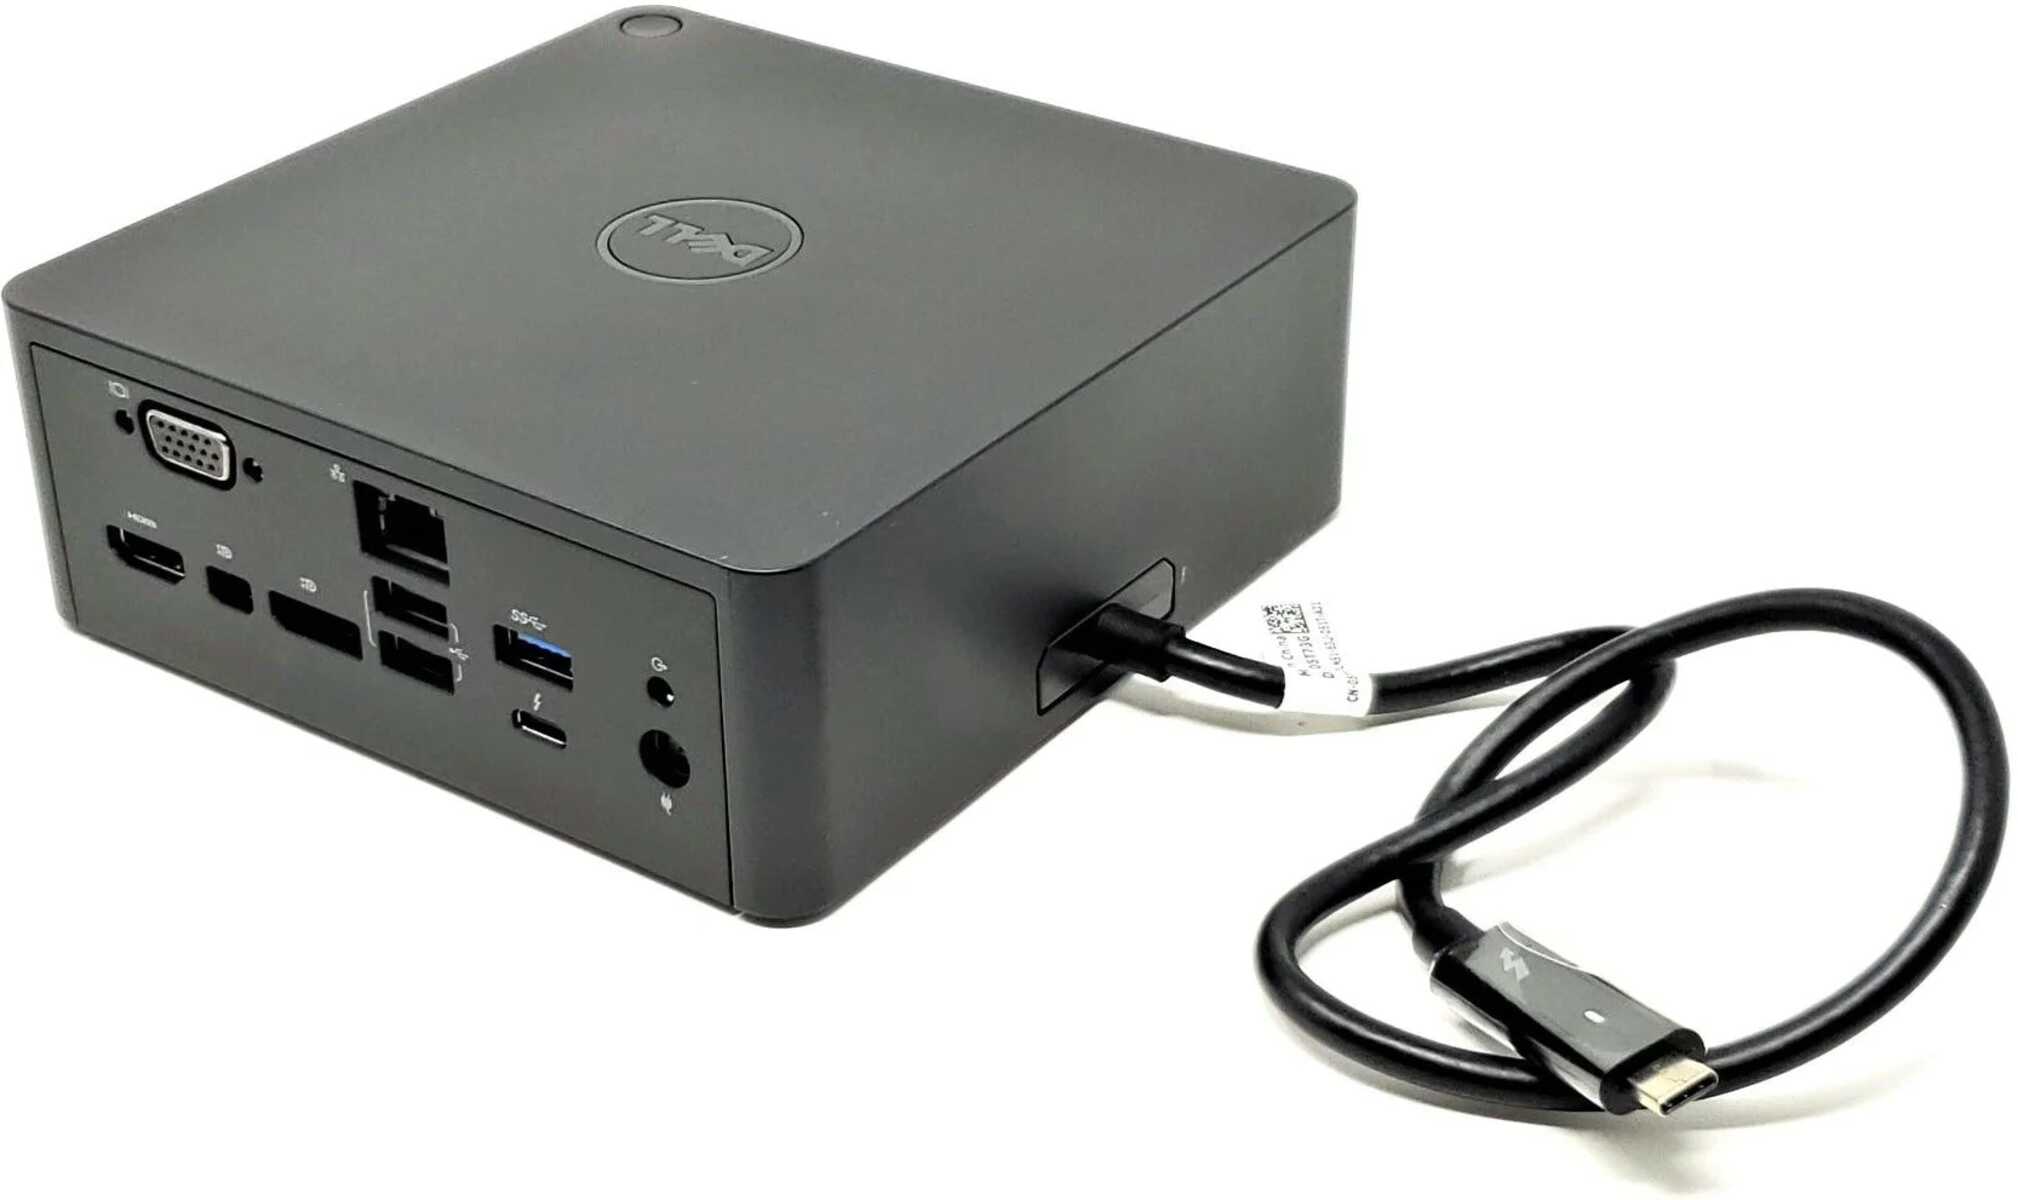 What Is The Need For Dell Thunderbolt Dock TB16